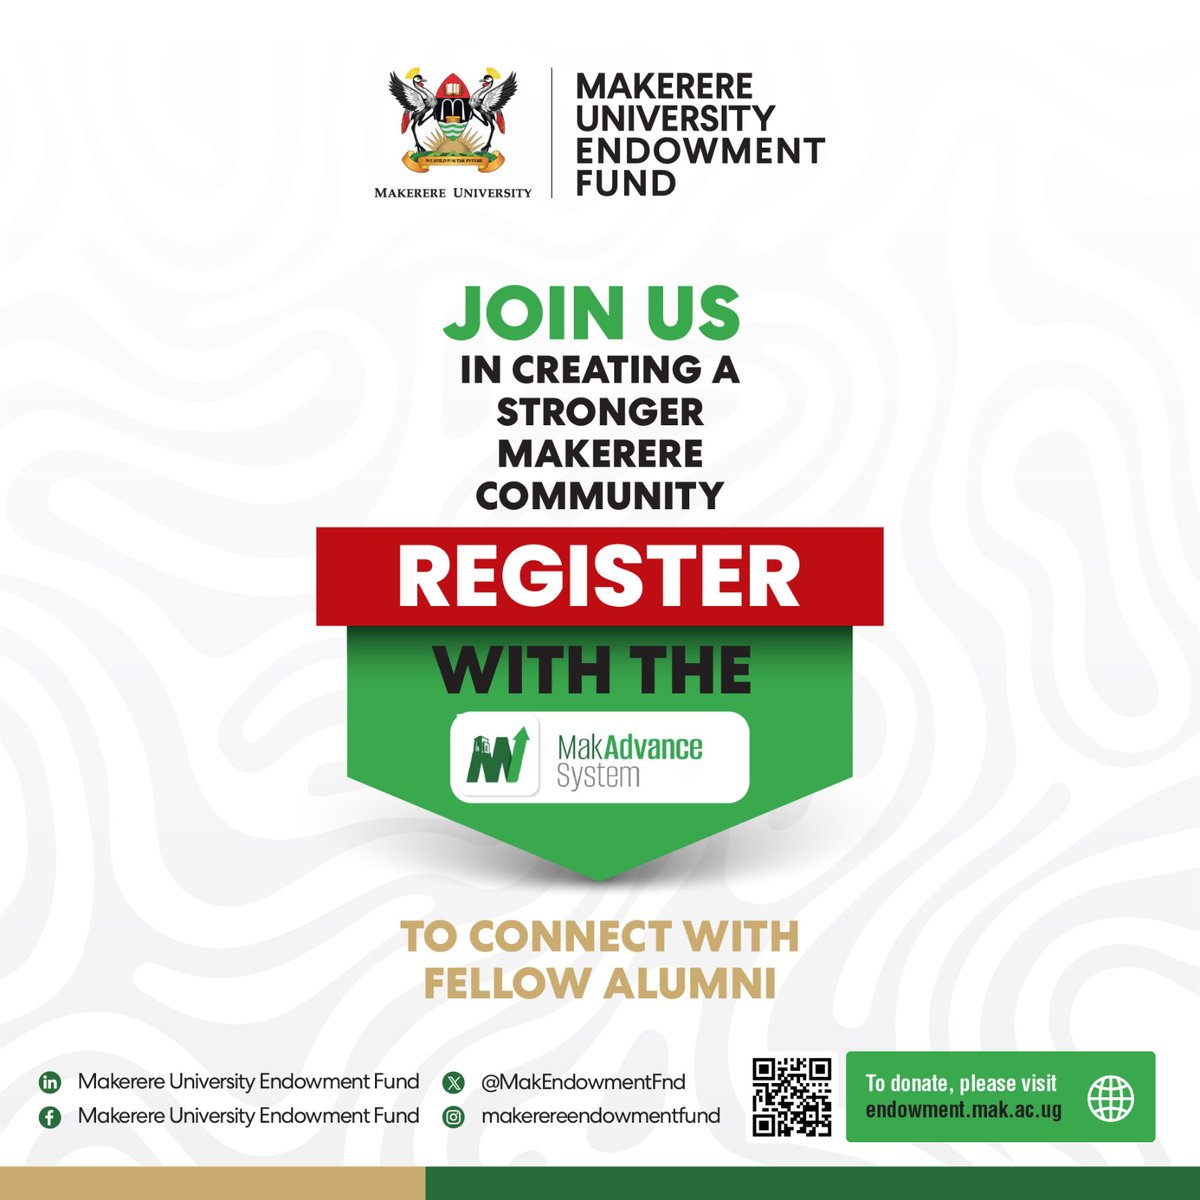 Have you heard about the #MakAdvanceSystem? For all the @Makerere alumni, this is your digital connection to your alma mater. Register with the alumni data base for the latest news from the Ivory Tower & donate to university causes. Register here endowment.mak.ac.ug/register/